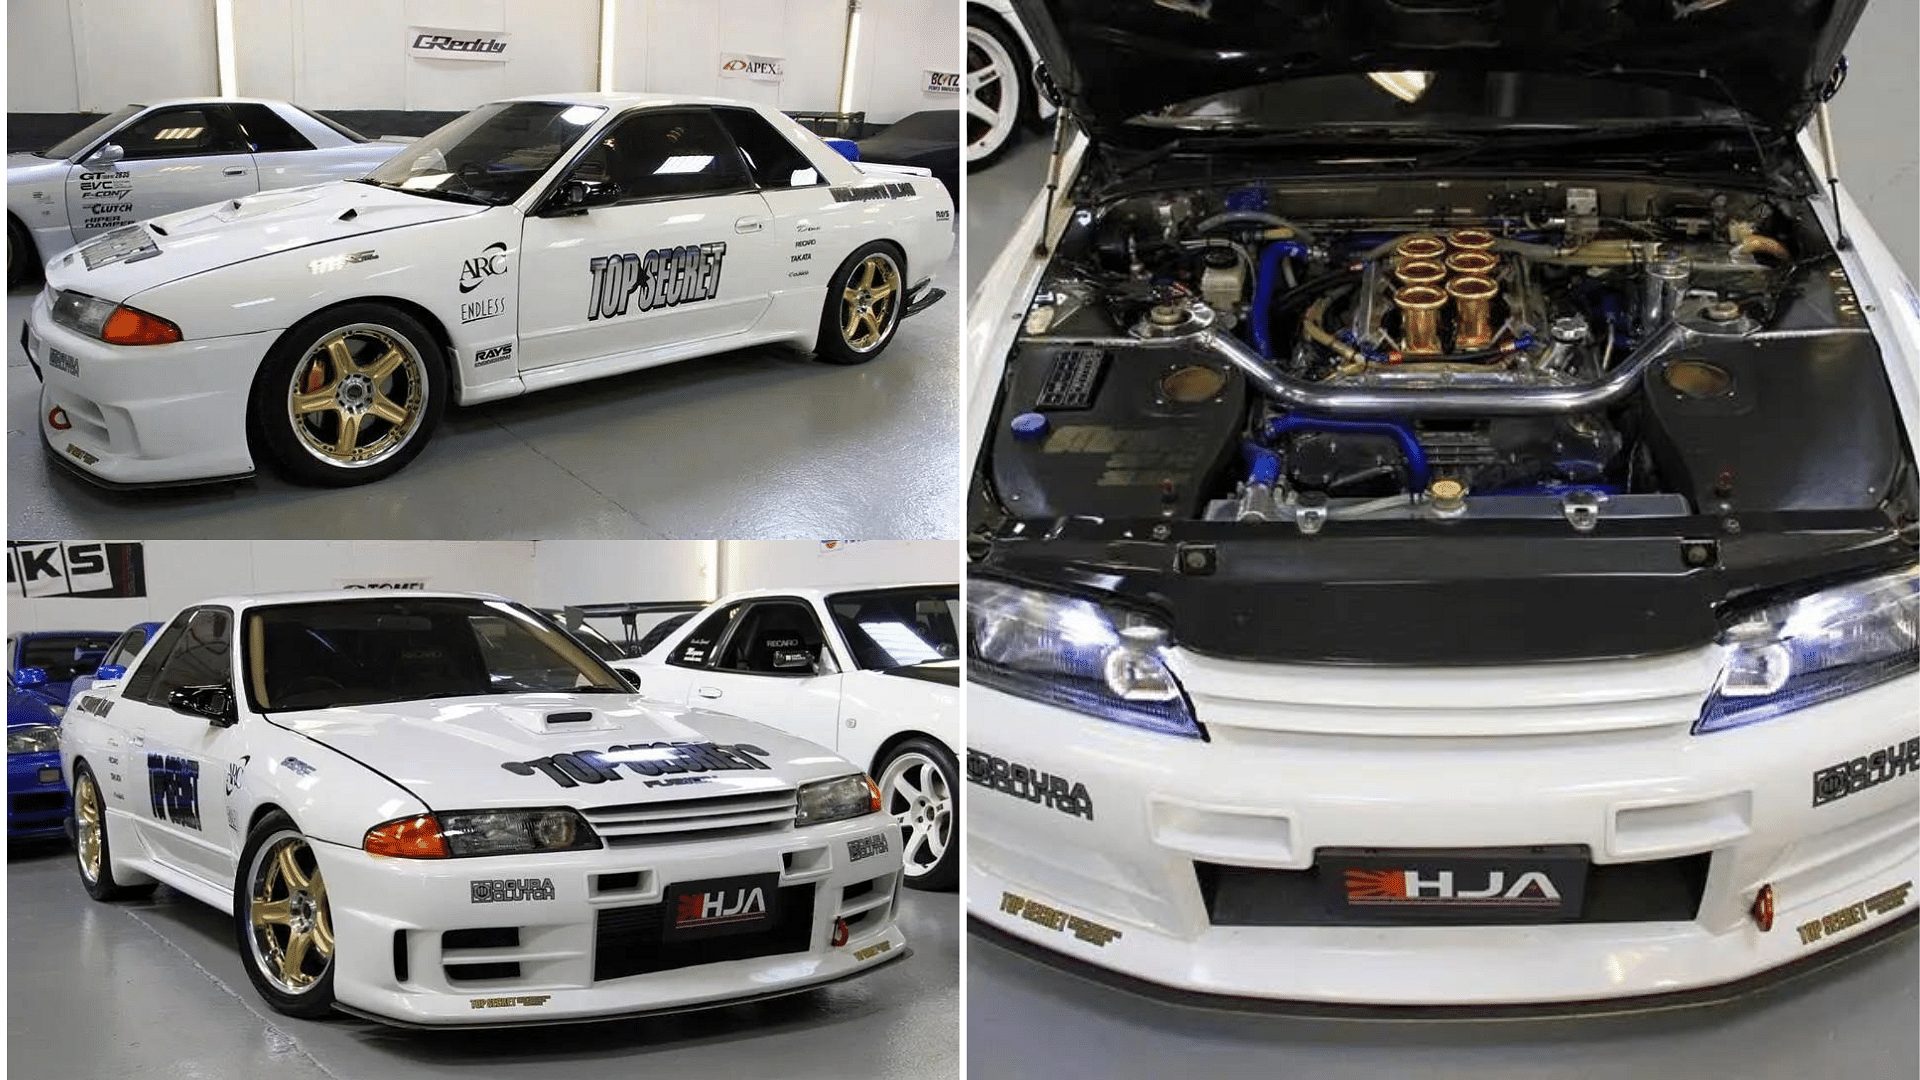 VQ32 Skyline GT-R front, side and engine view